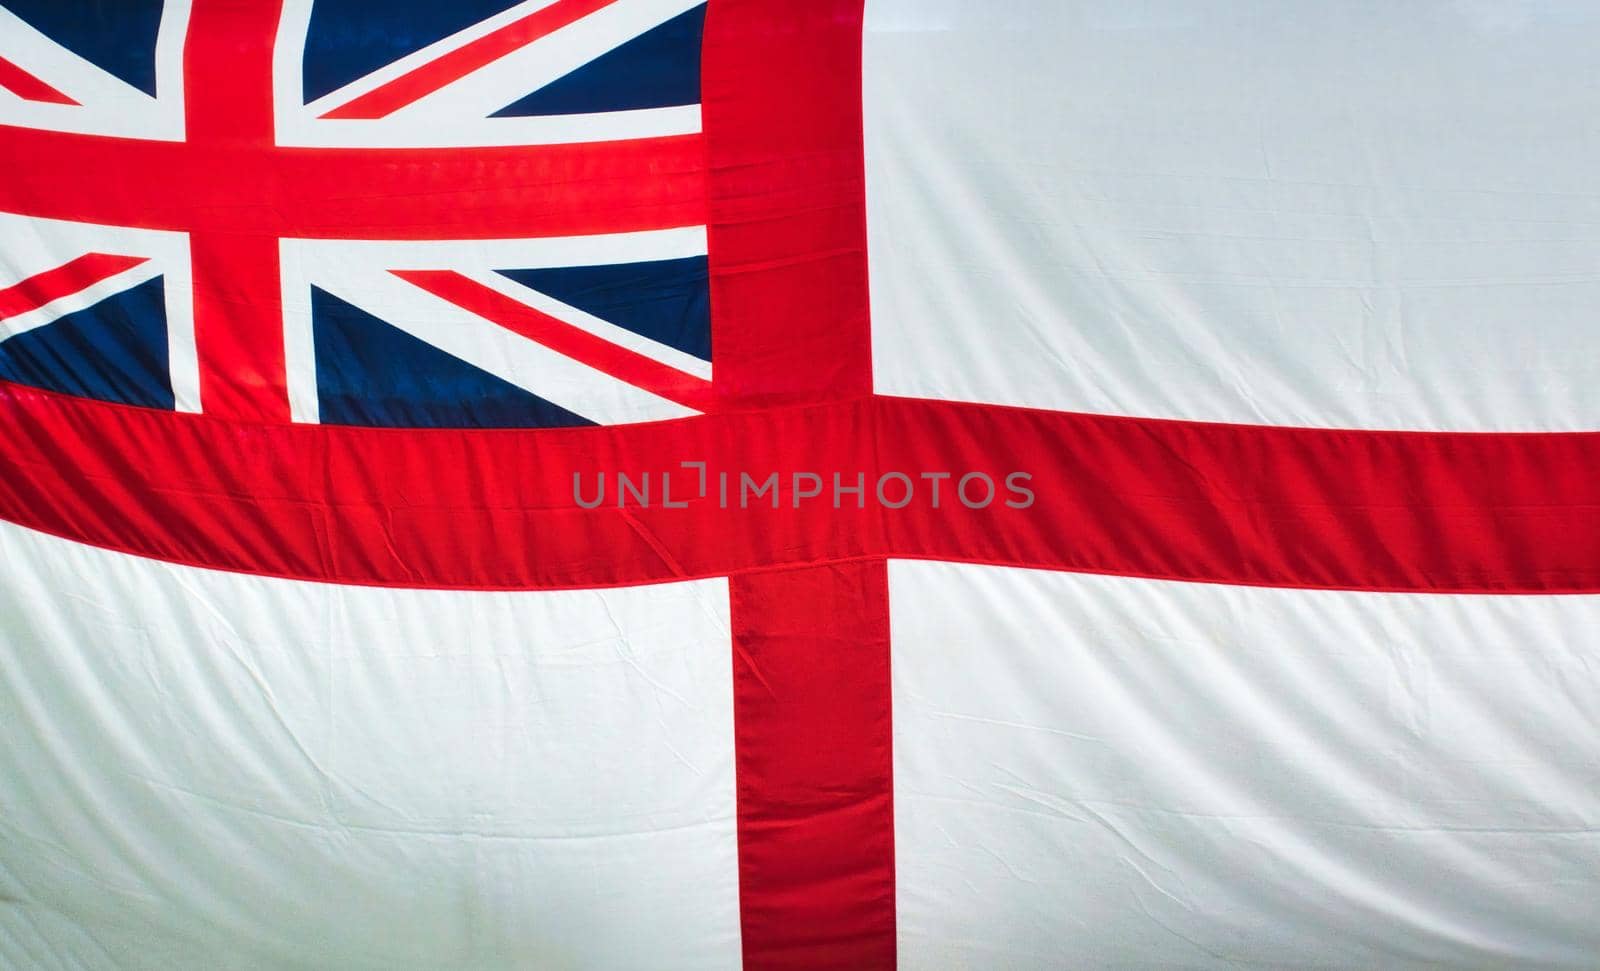 White Ensign, or St George's Ensign flag, showing the England flag with the Union Jack in one corner by tennesseewitney